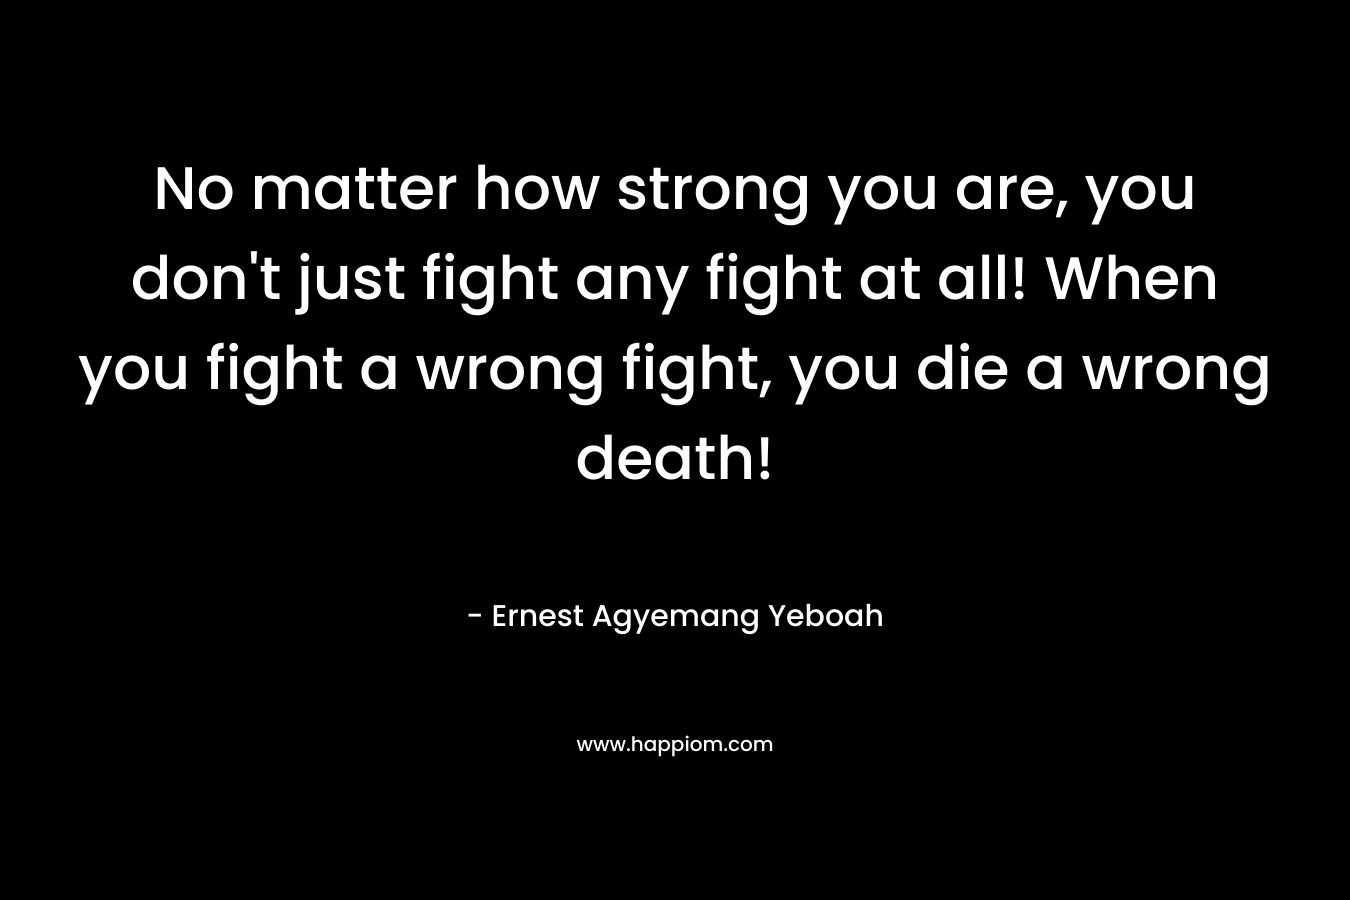 No matter how strong you are, you don't just fight any fight at all! When you fight a wrong fight, you die a wrong death!